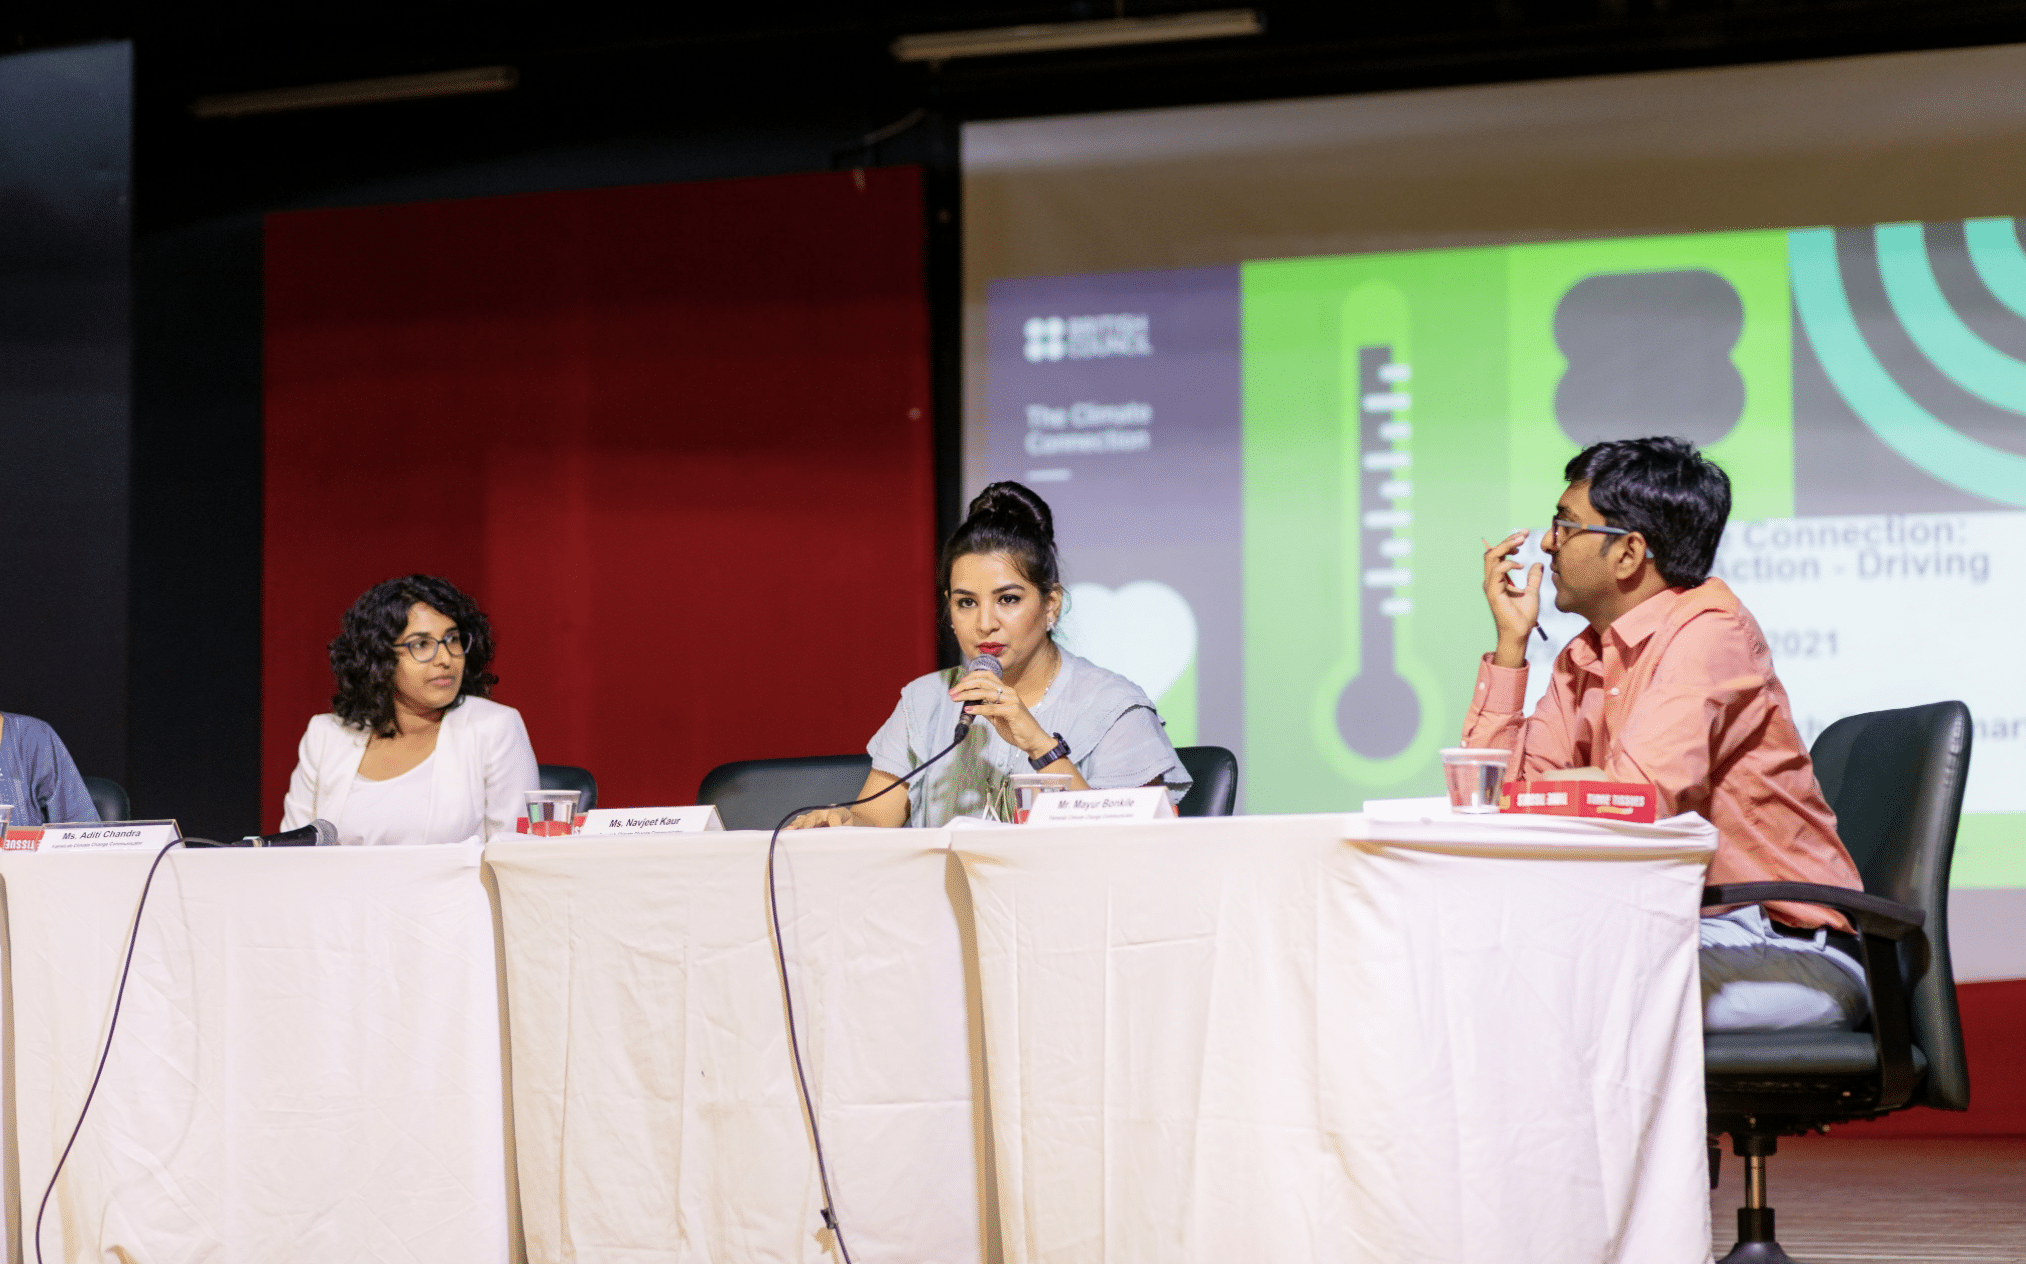 Three people sit at a table with microphones. Two are listening while one in the middle speaks in front of a presentation.